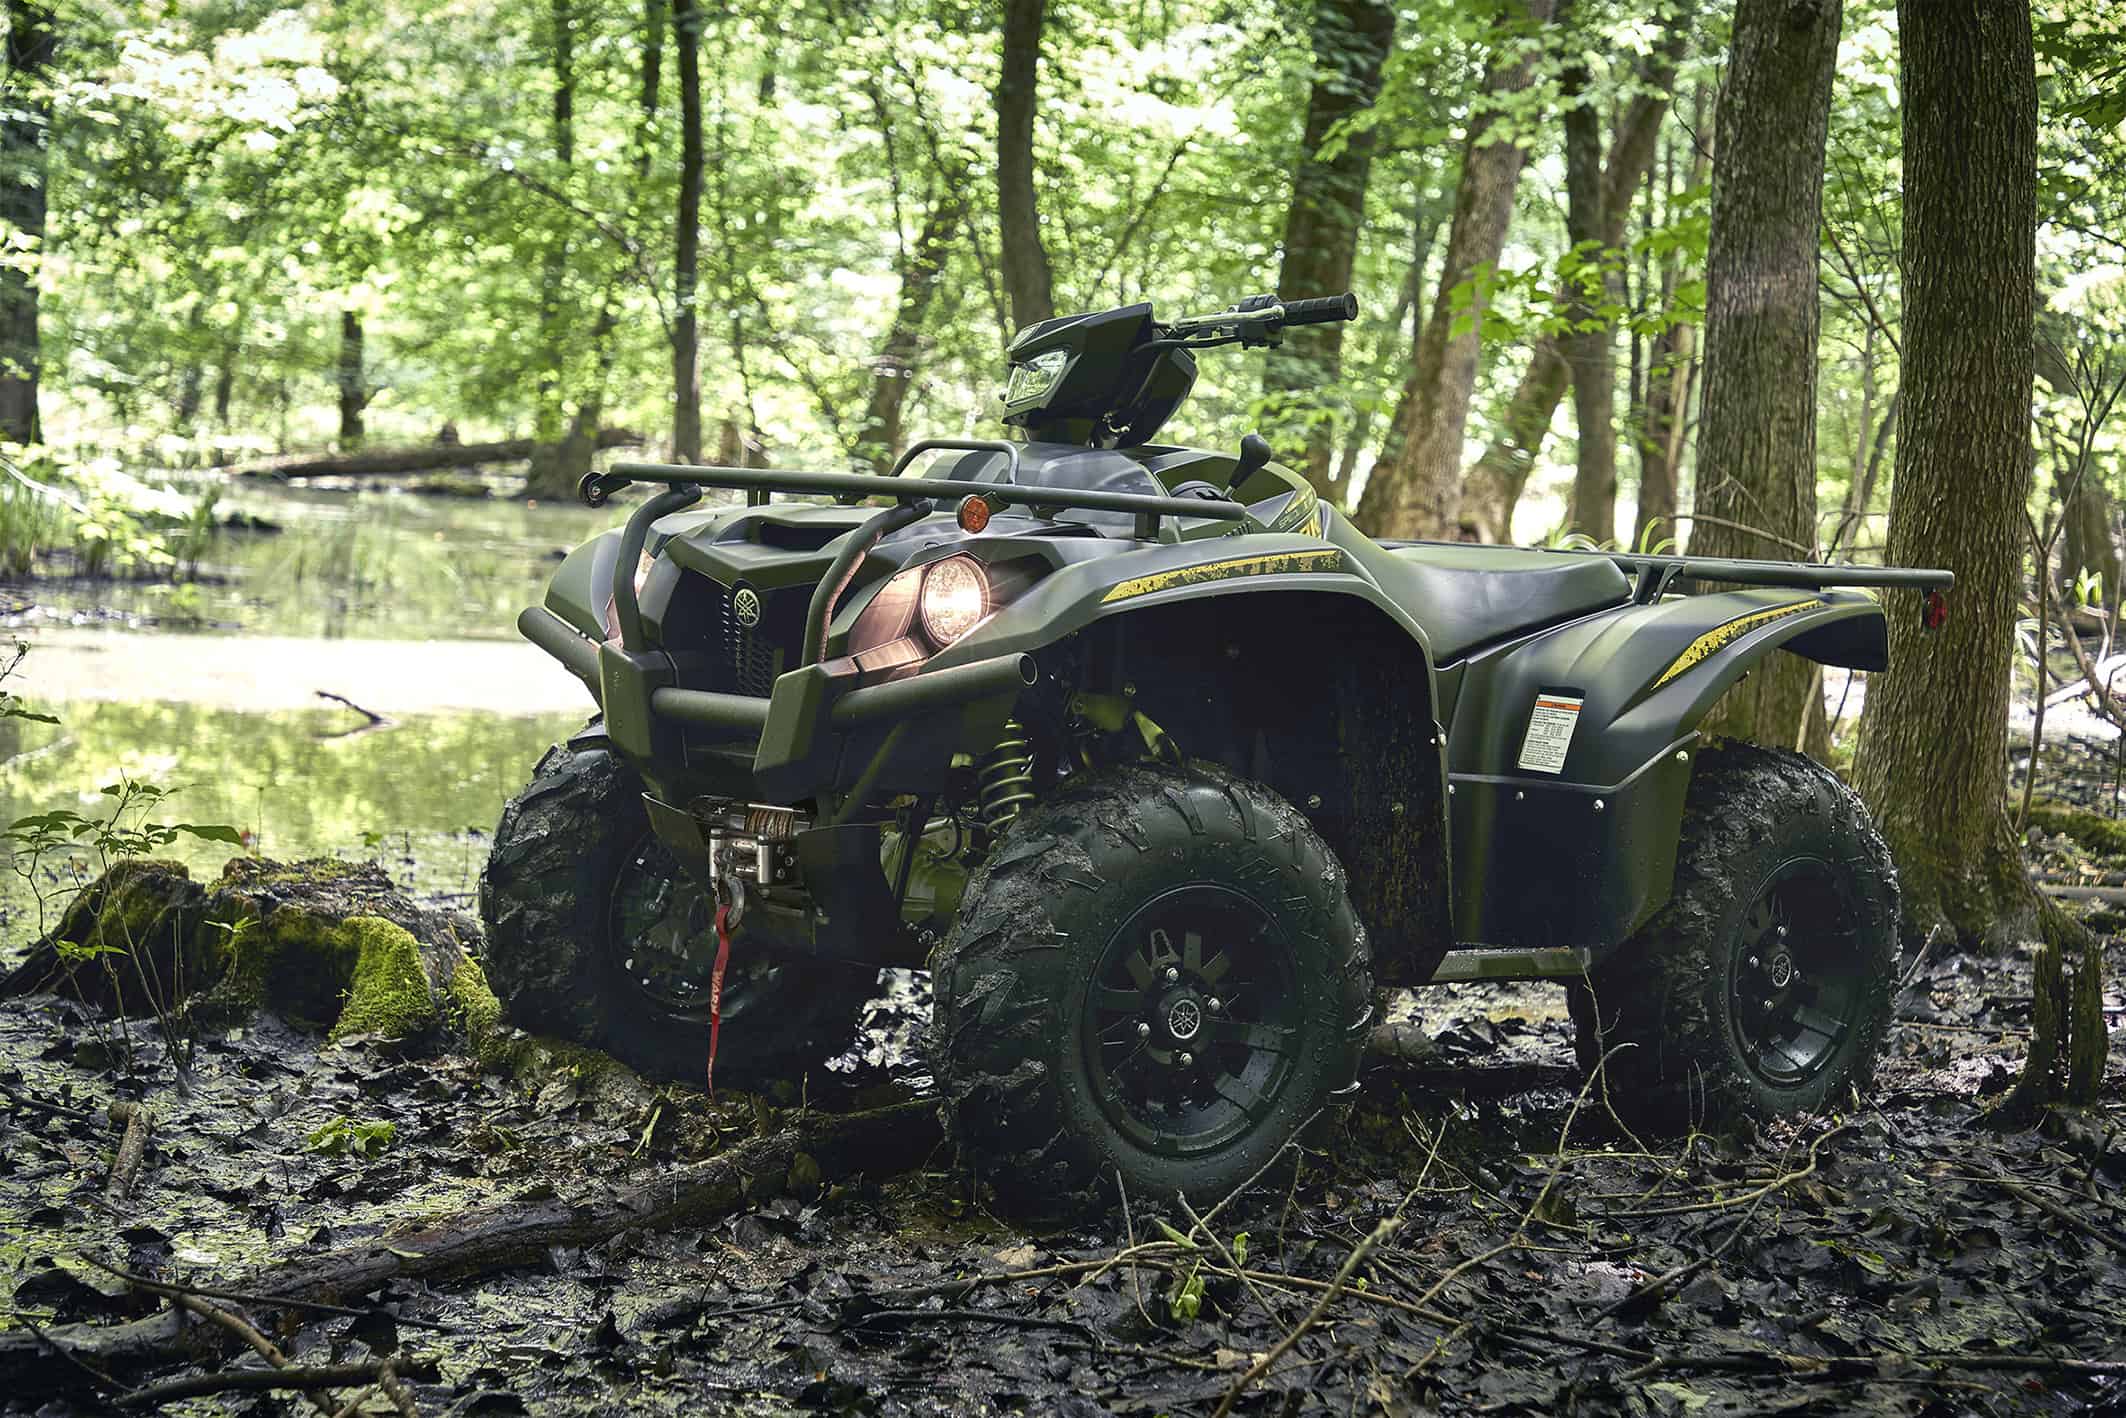 Yamaha introduces new tracking device to keep ATVs and farmers safe